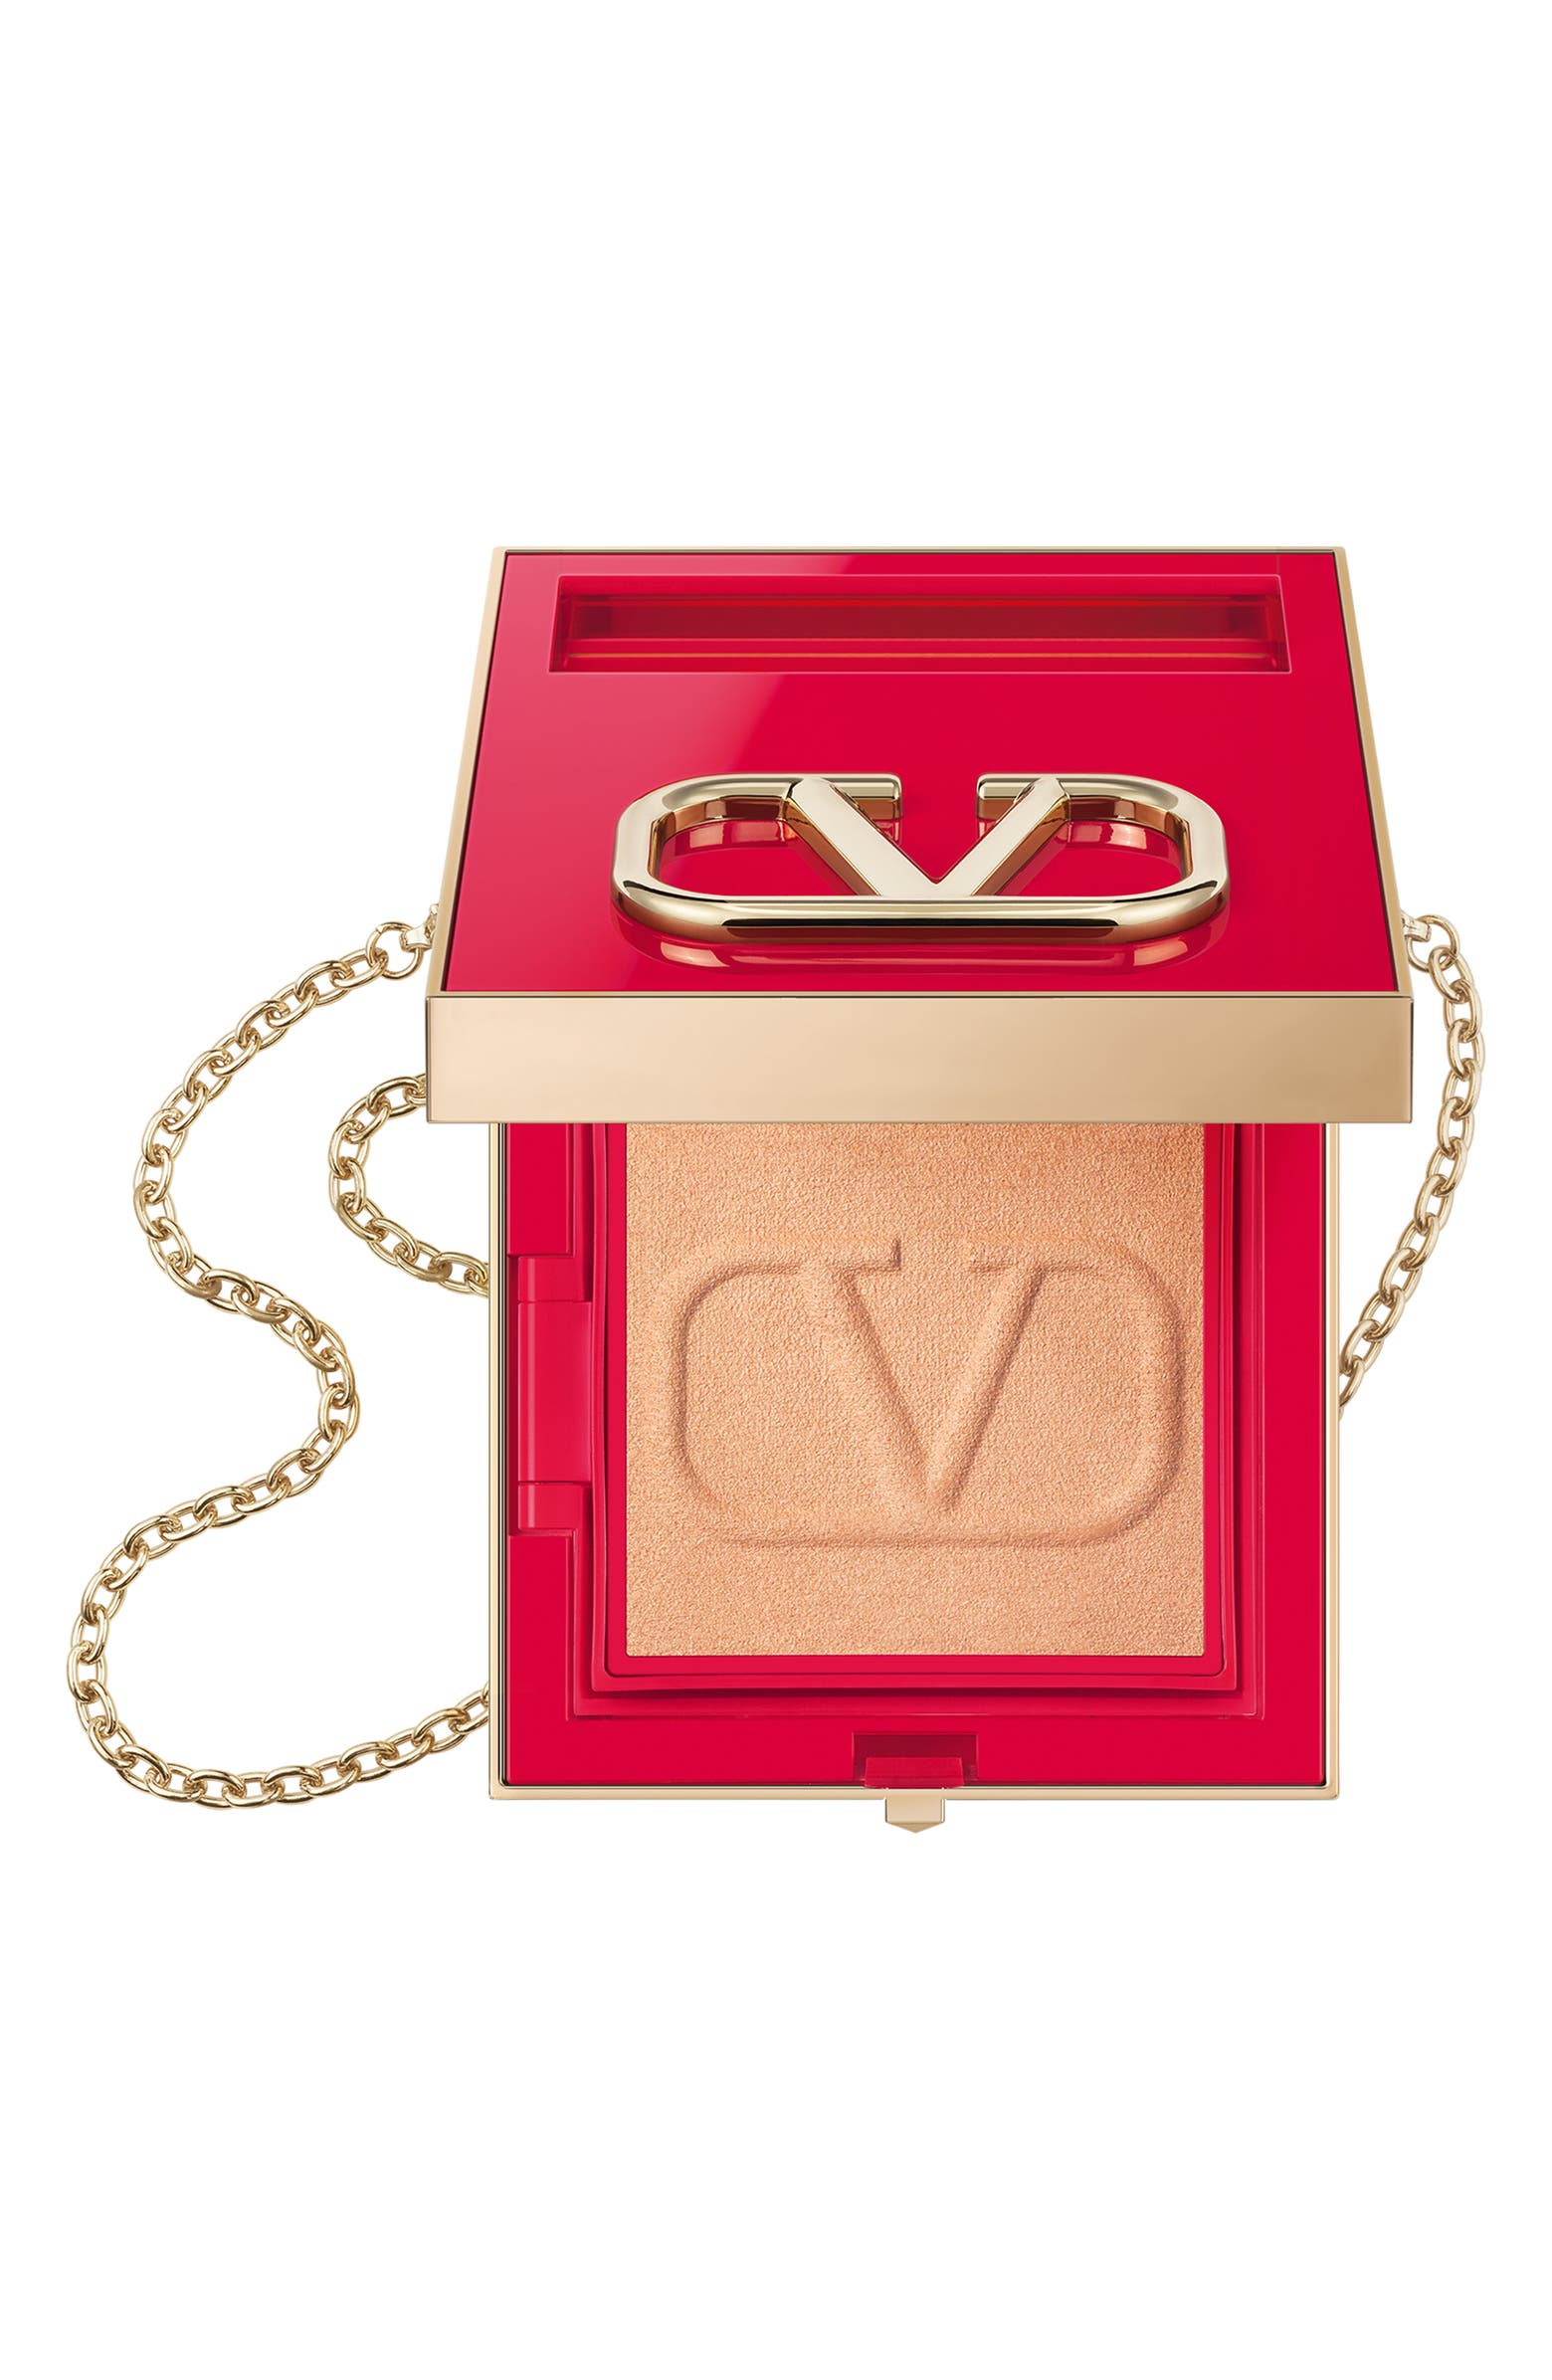 The Most Expensive Makeup Brands: Compact setting powder from Valentino